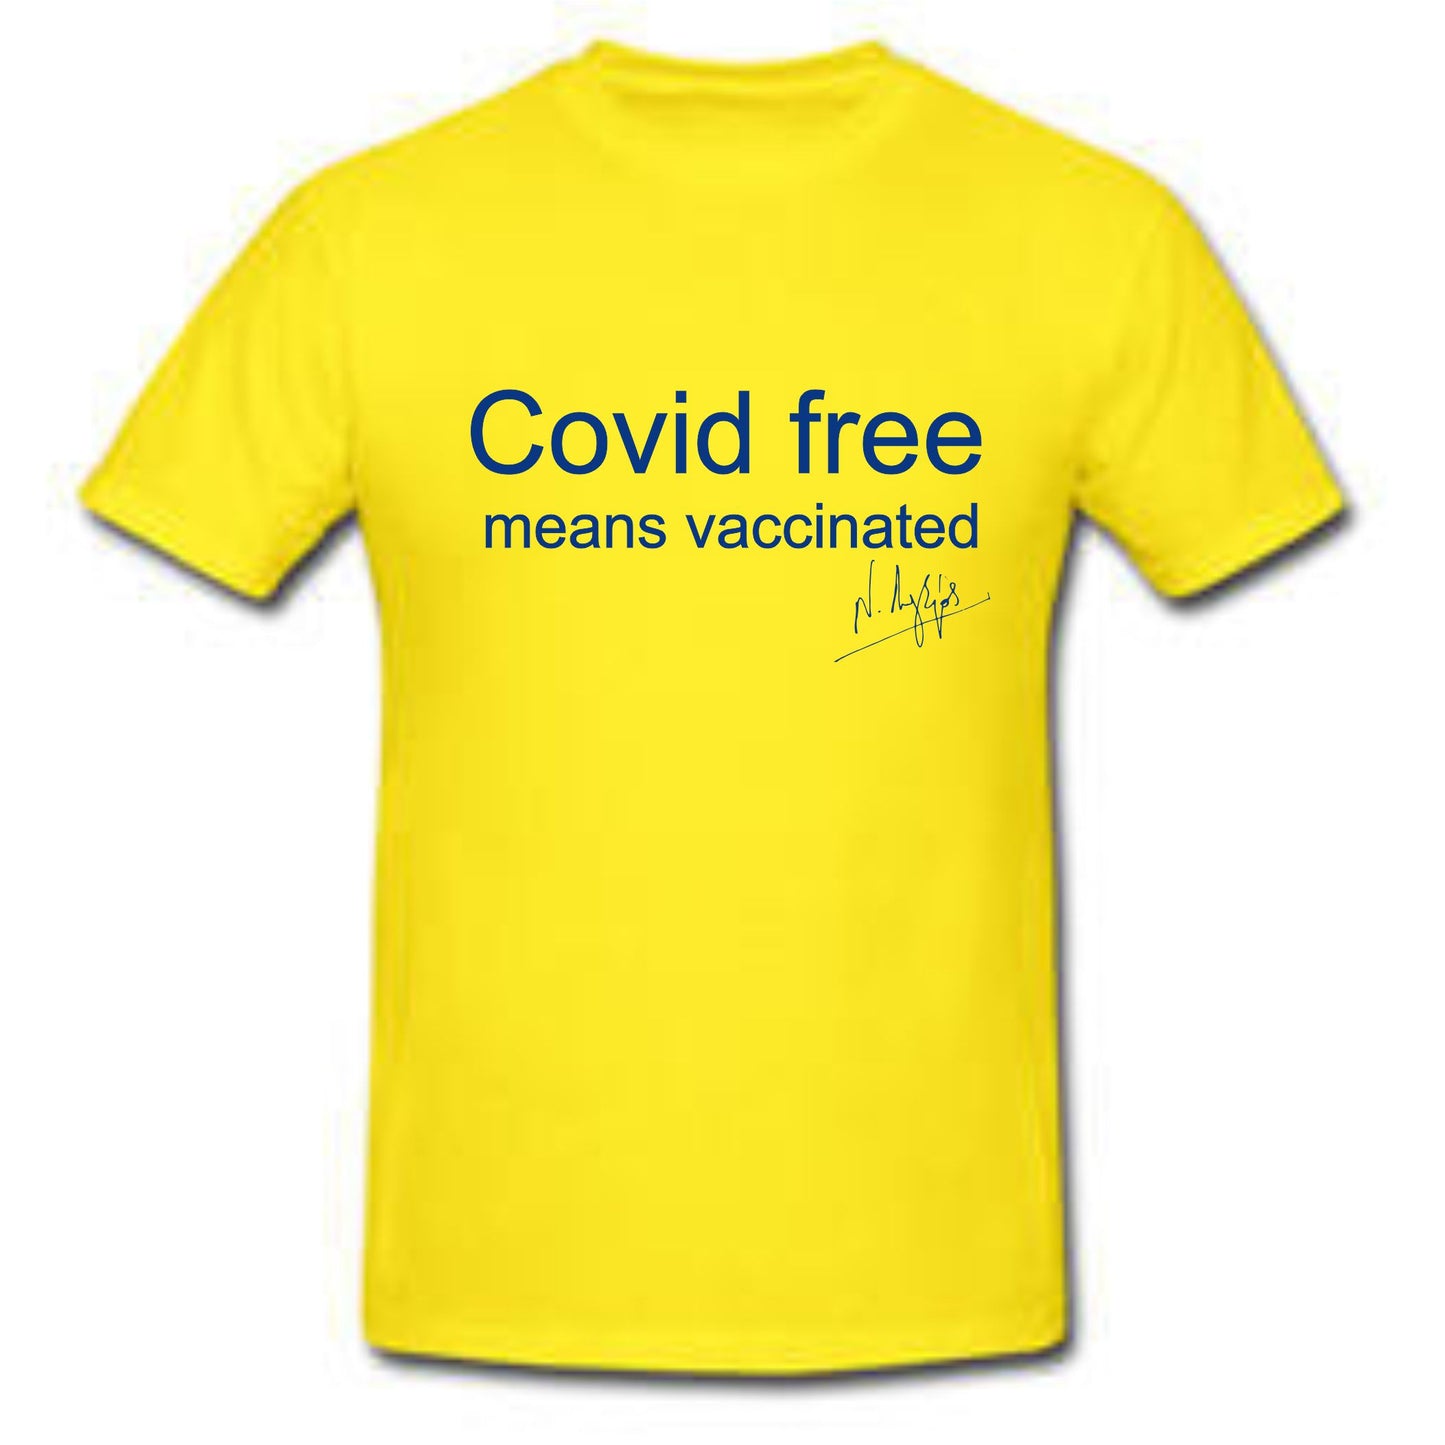 Covid free means vaccinated